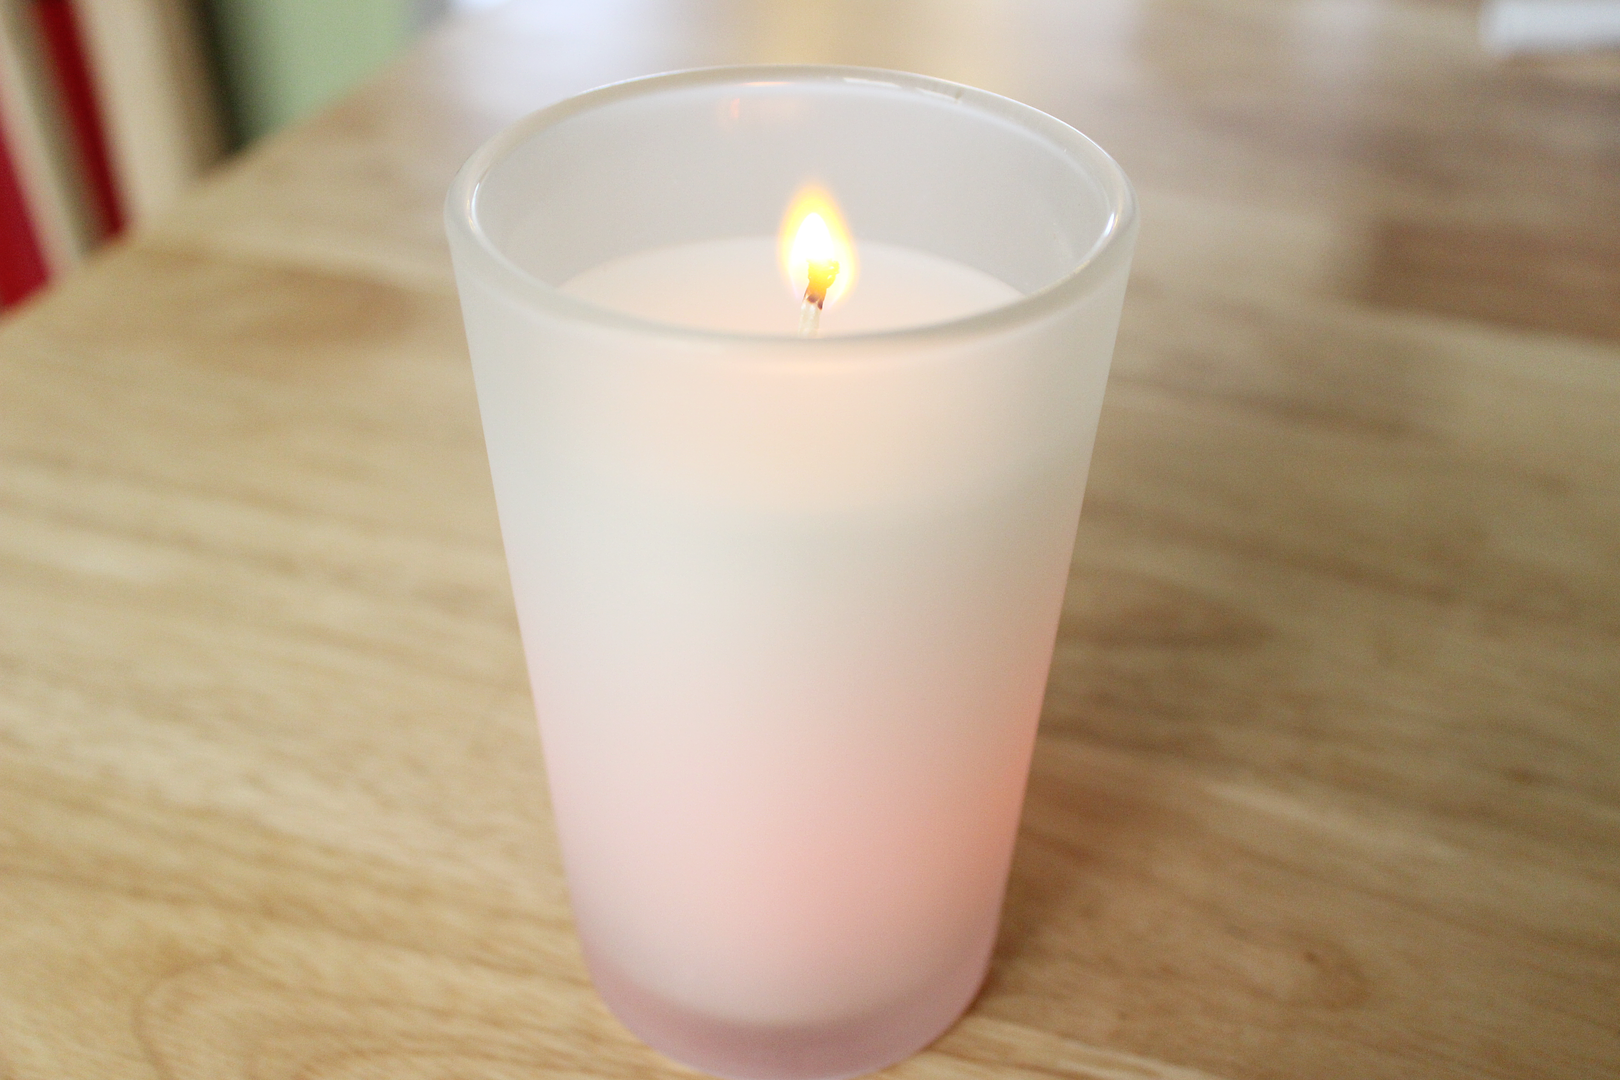 Air Wick Colour Change Scented Candle